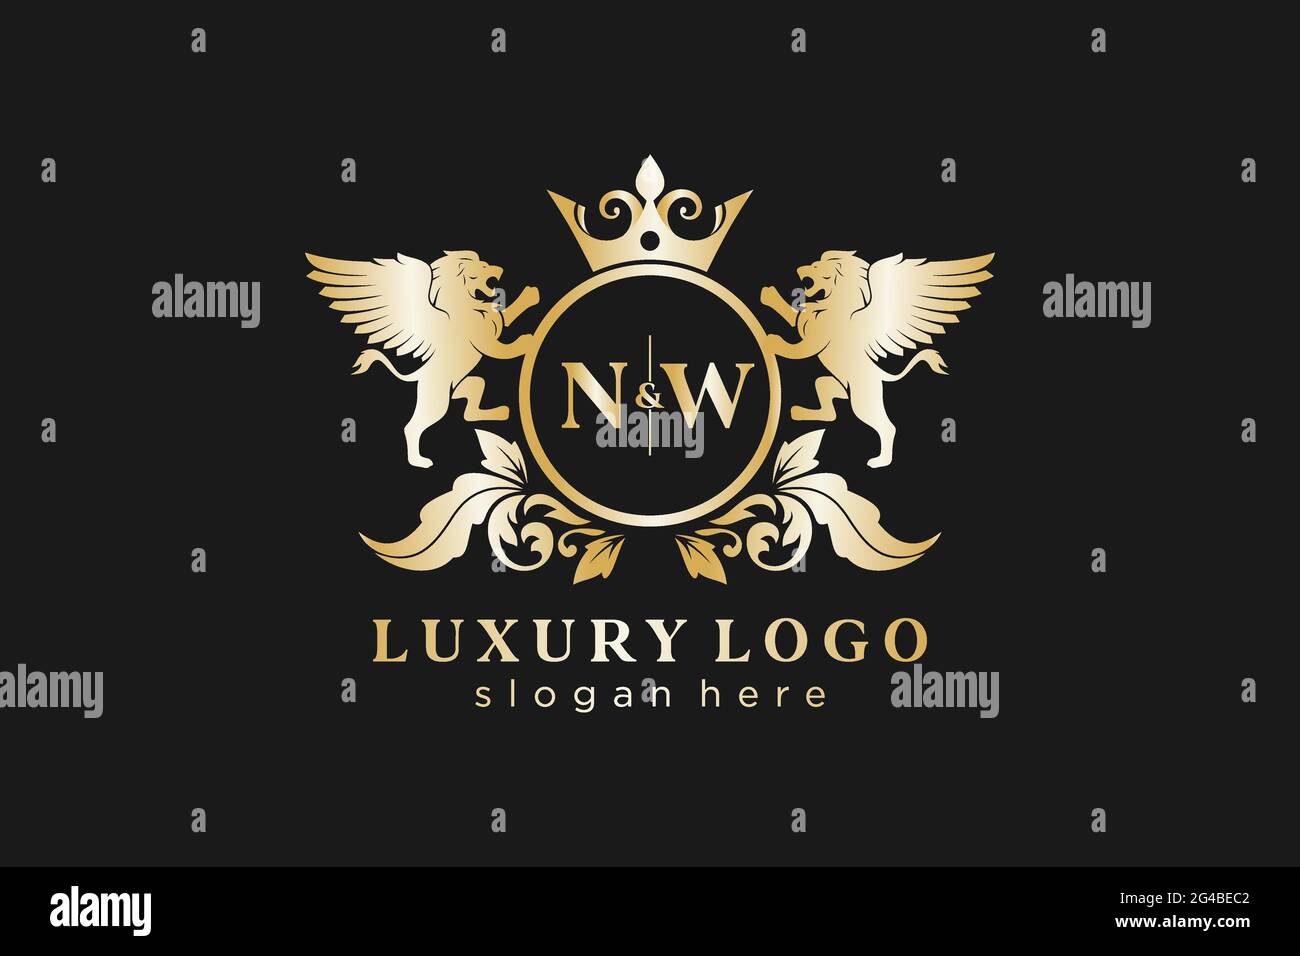 NW Letter Lion Royal Luxury Logo template in vector art for Restaurant, Royalty, Boutique, Cafe, Hotel, Heraldic, Jewelry, Fashion and other vector il Stock Vector